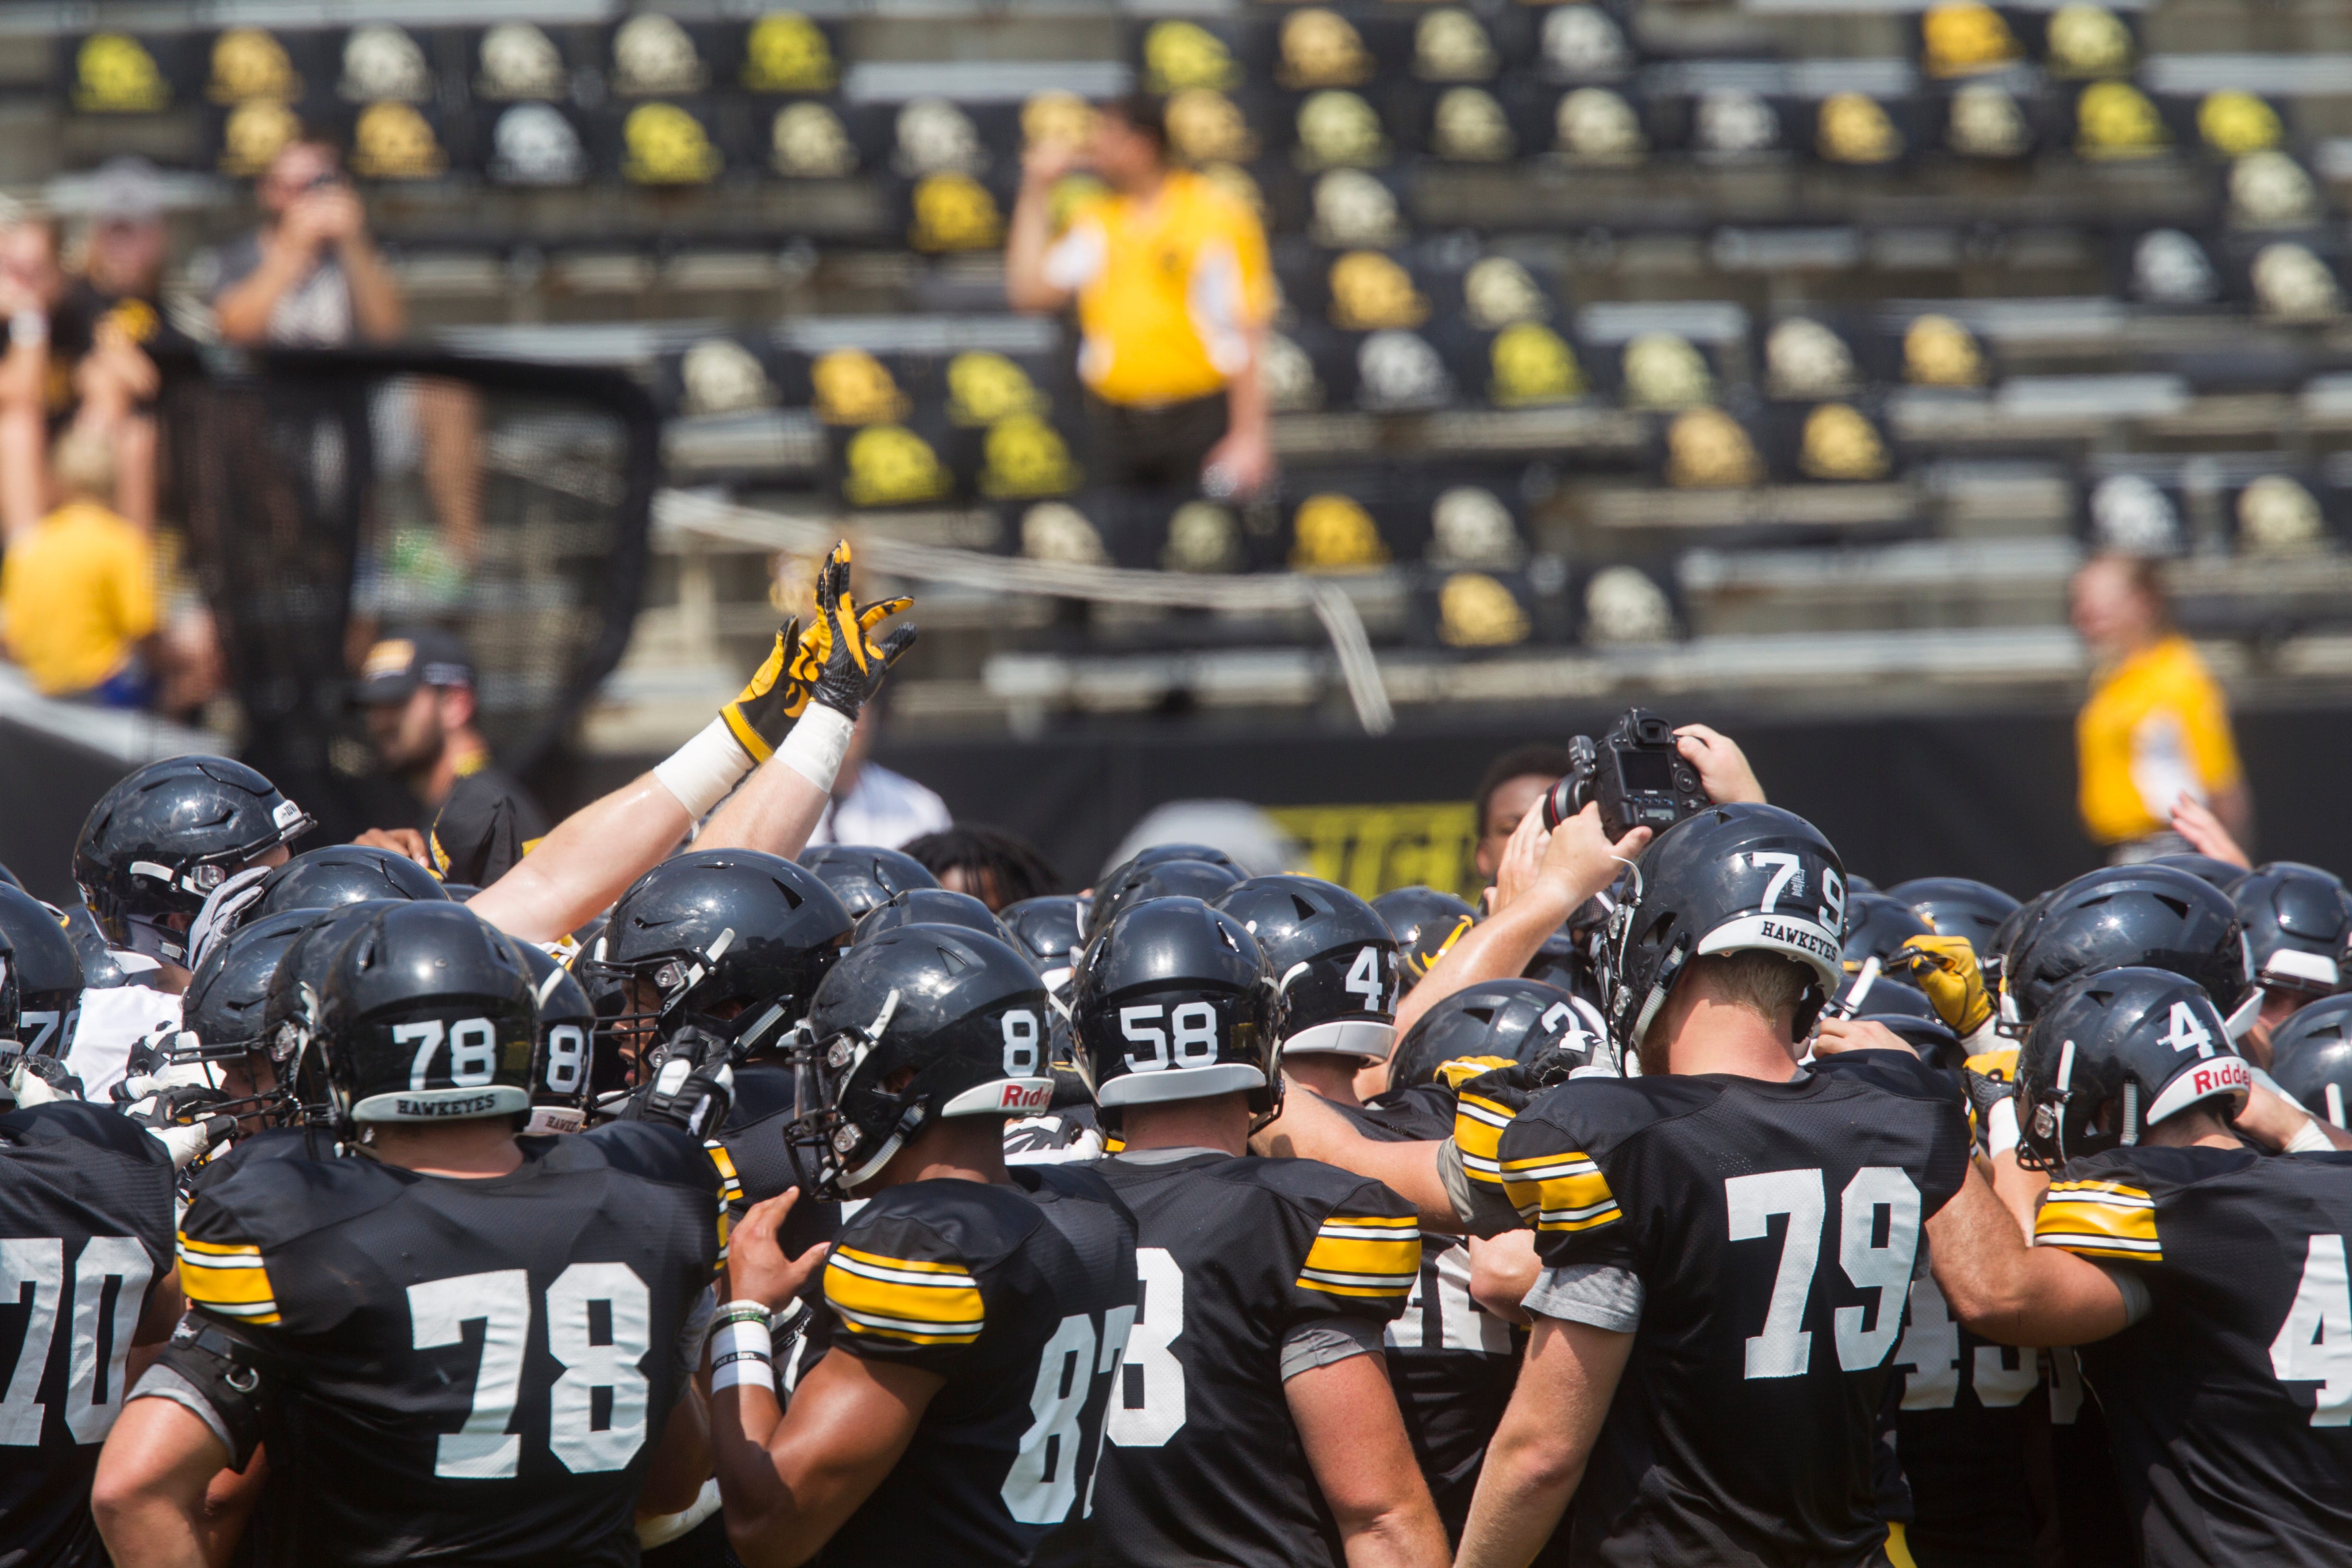 Iowa players huddle during a Kids Day practice on Saturday, Aug. 11, 2018, at Kinnick Stadium in Iowa City.